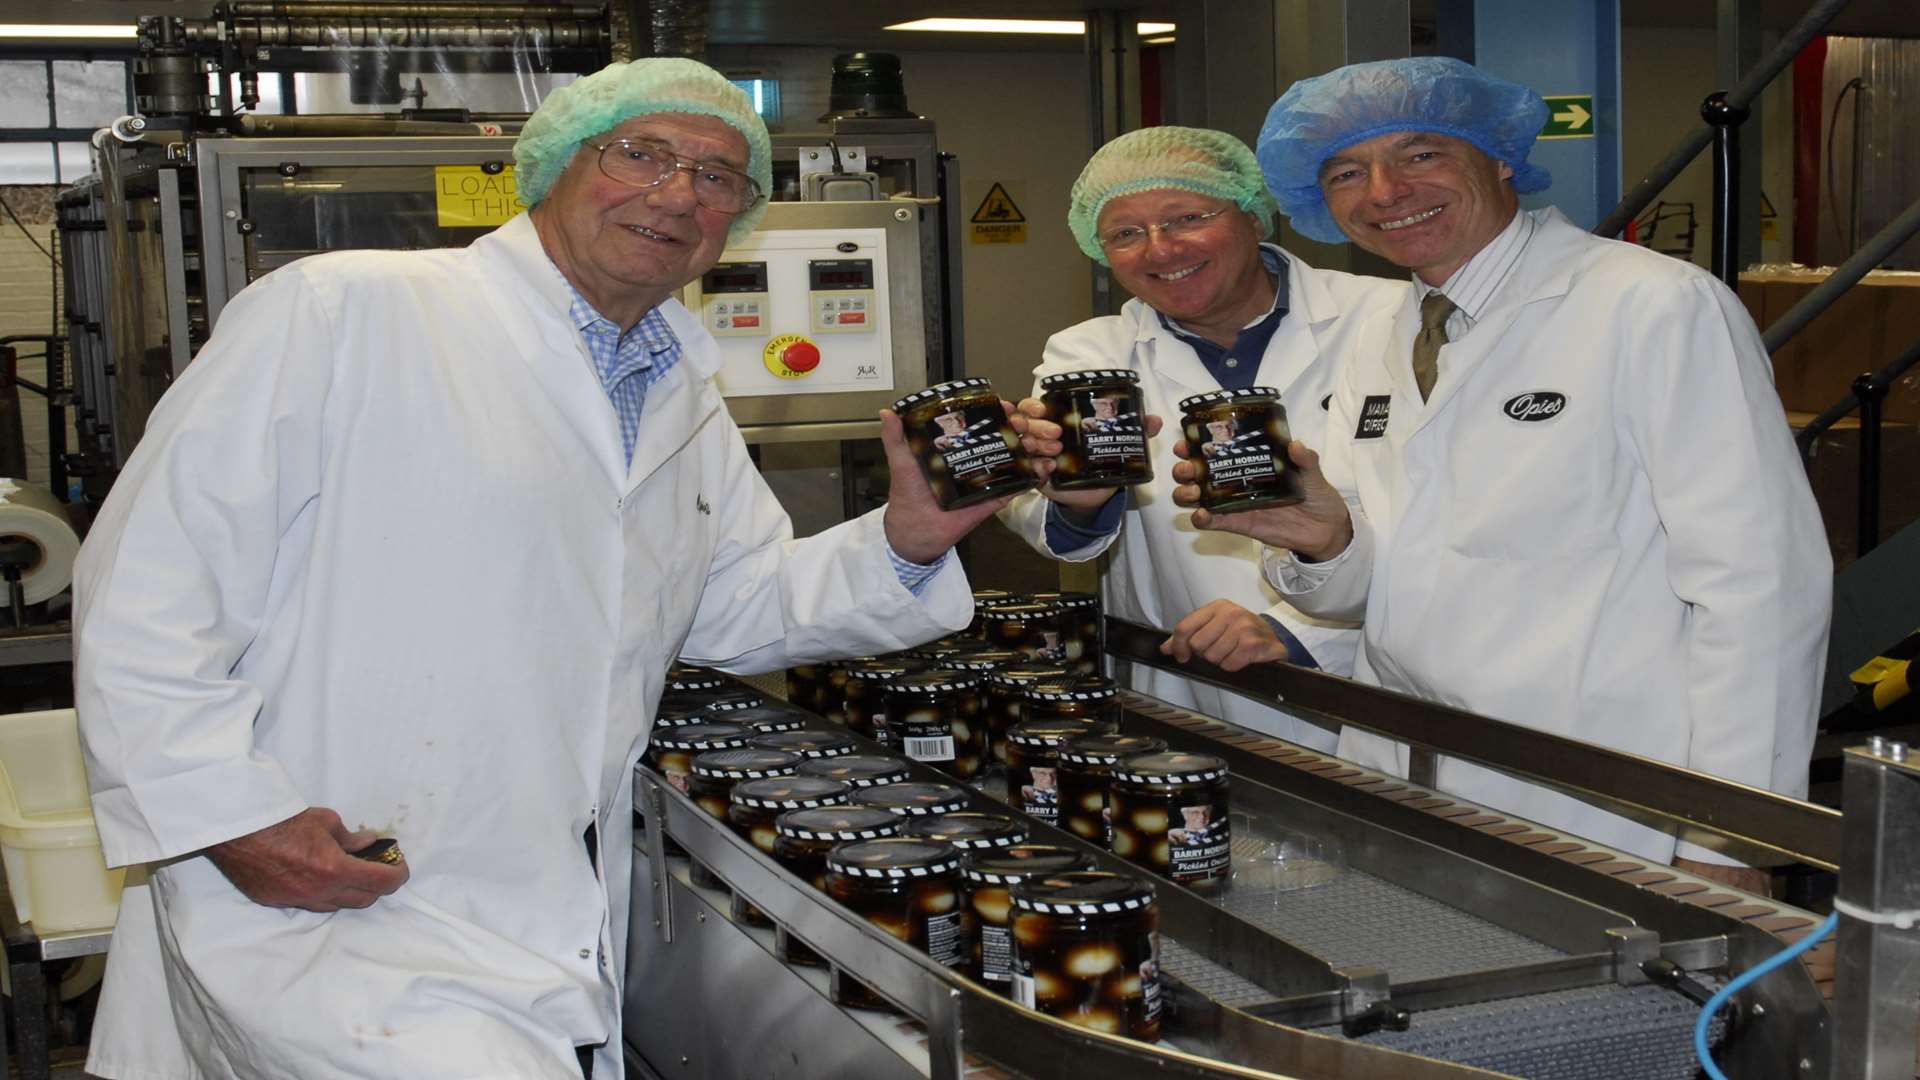 From left, Barry Norman, John Wringe and William Opie with the jars of pickled onions